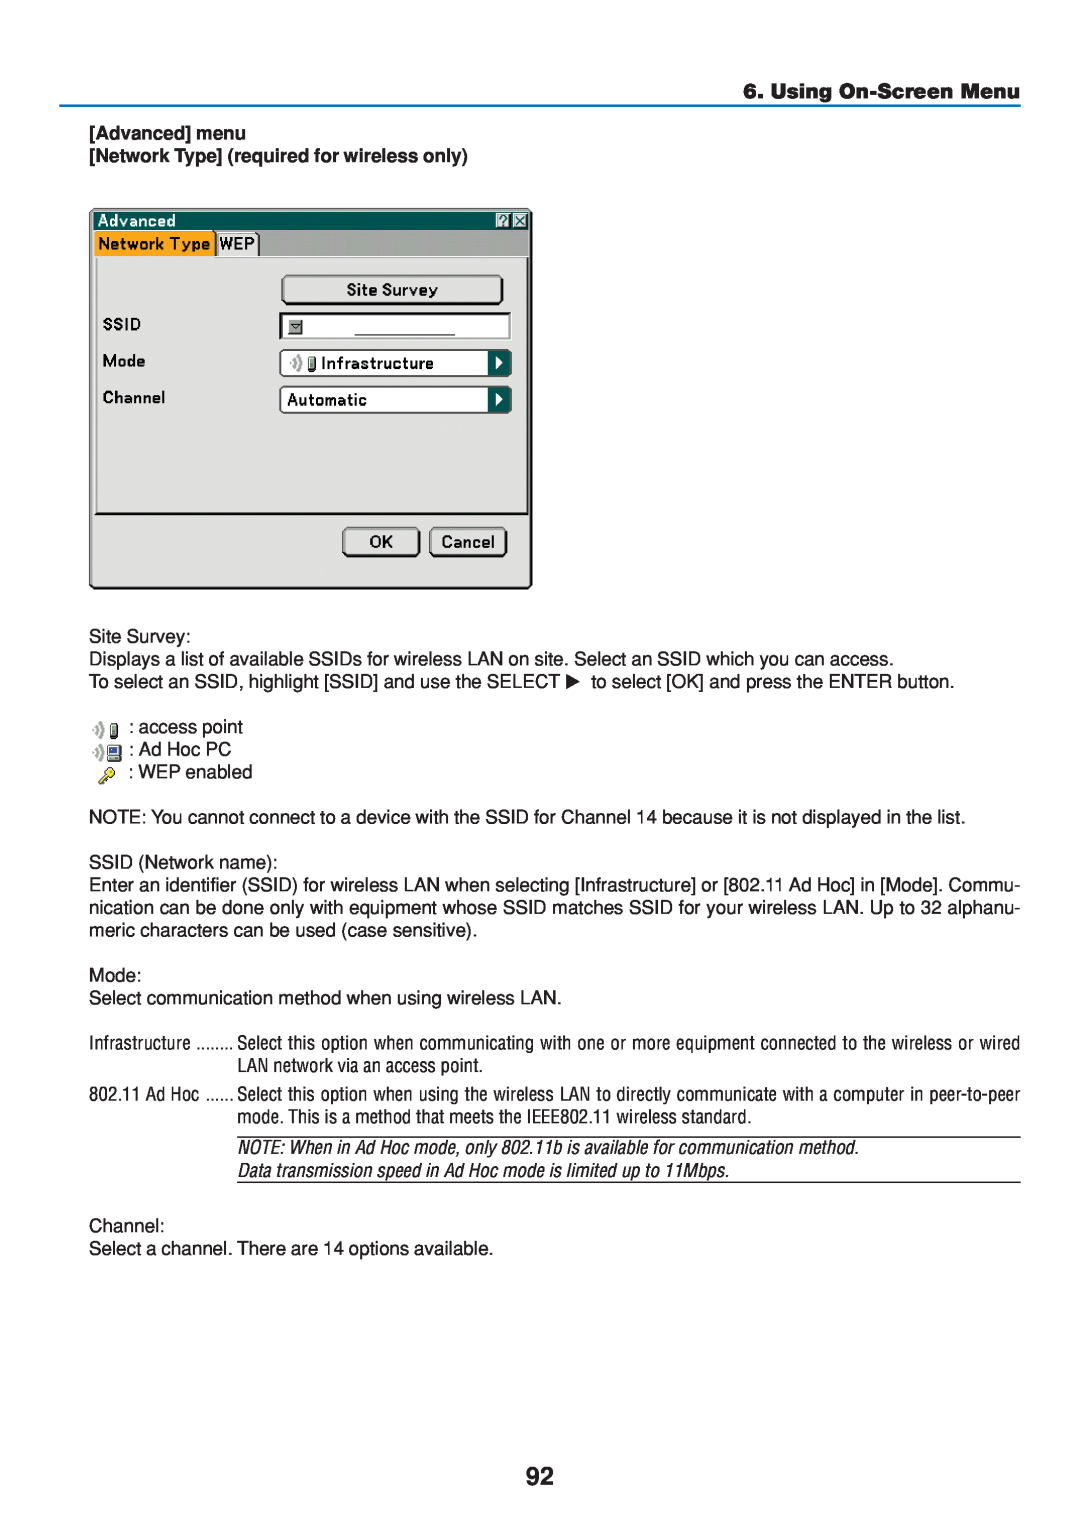 Dukane 8808 user manual Using On-Screen Menu, Advanced menu Network Type required for wireless only 